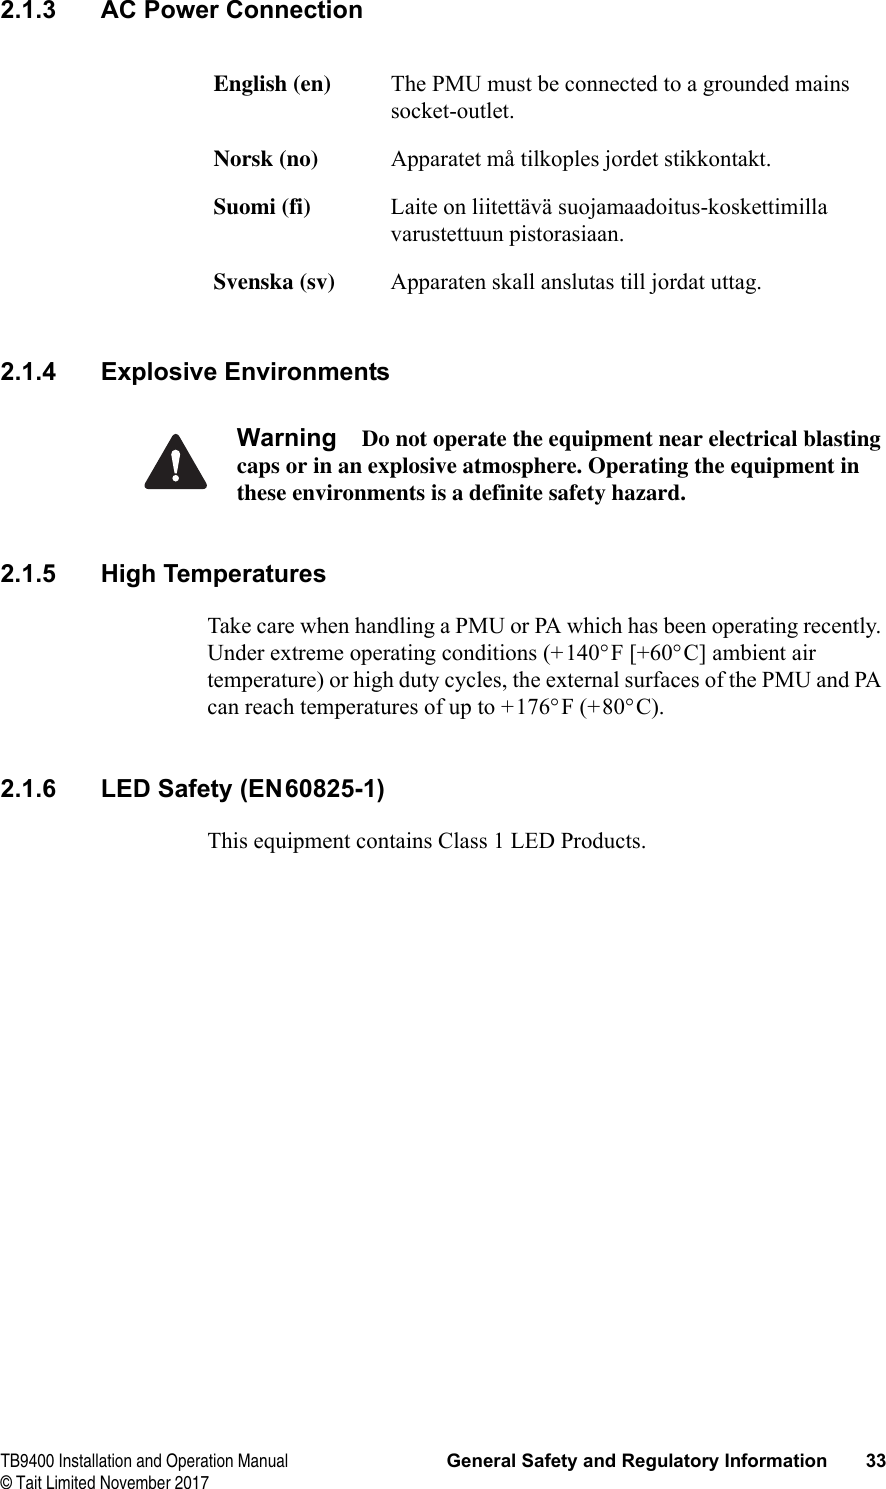  TB9400 Installation and Operation Manual General Safety and Regulatory Information 33© Tait Limited November 20172.1.3 AC Power Connection2.1.4 Explosive EnvironmentsWarning Do not operate the equipment near electrical blasting caps or in an explosive atmosphere. Operating the equipment in these environments is a definite safety hazard.2.1.5 High TemperaturesTake care when handling a PMU or PA which has been operating recently. Under extreme operating conditions (+140°F [+60°C] ambient air temperature) or high duty cycles, the external surfaces of the PMU and PA can reach temperatures of up to +176°F (+80°C).2.1.6 LED Safety (EN60825-1)This equipment contains Class 1 LED Products.English (en) The PMU must be connected to a grounded mains socket-outlet.Norsk (no) Apparatet må tilkoples jordet stikkontakt.Suomi (fi) Laite on liitettävä suojamaadoitus-koskettimilla varustettuun pistorasiaan.Svenska (sv) Apparaten skall anslutas till jordat uttag.